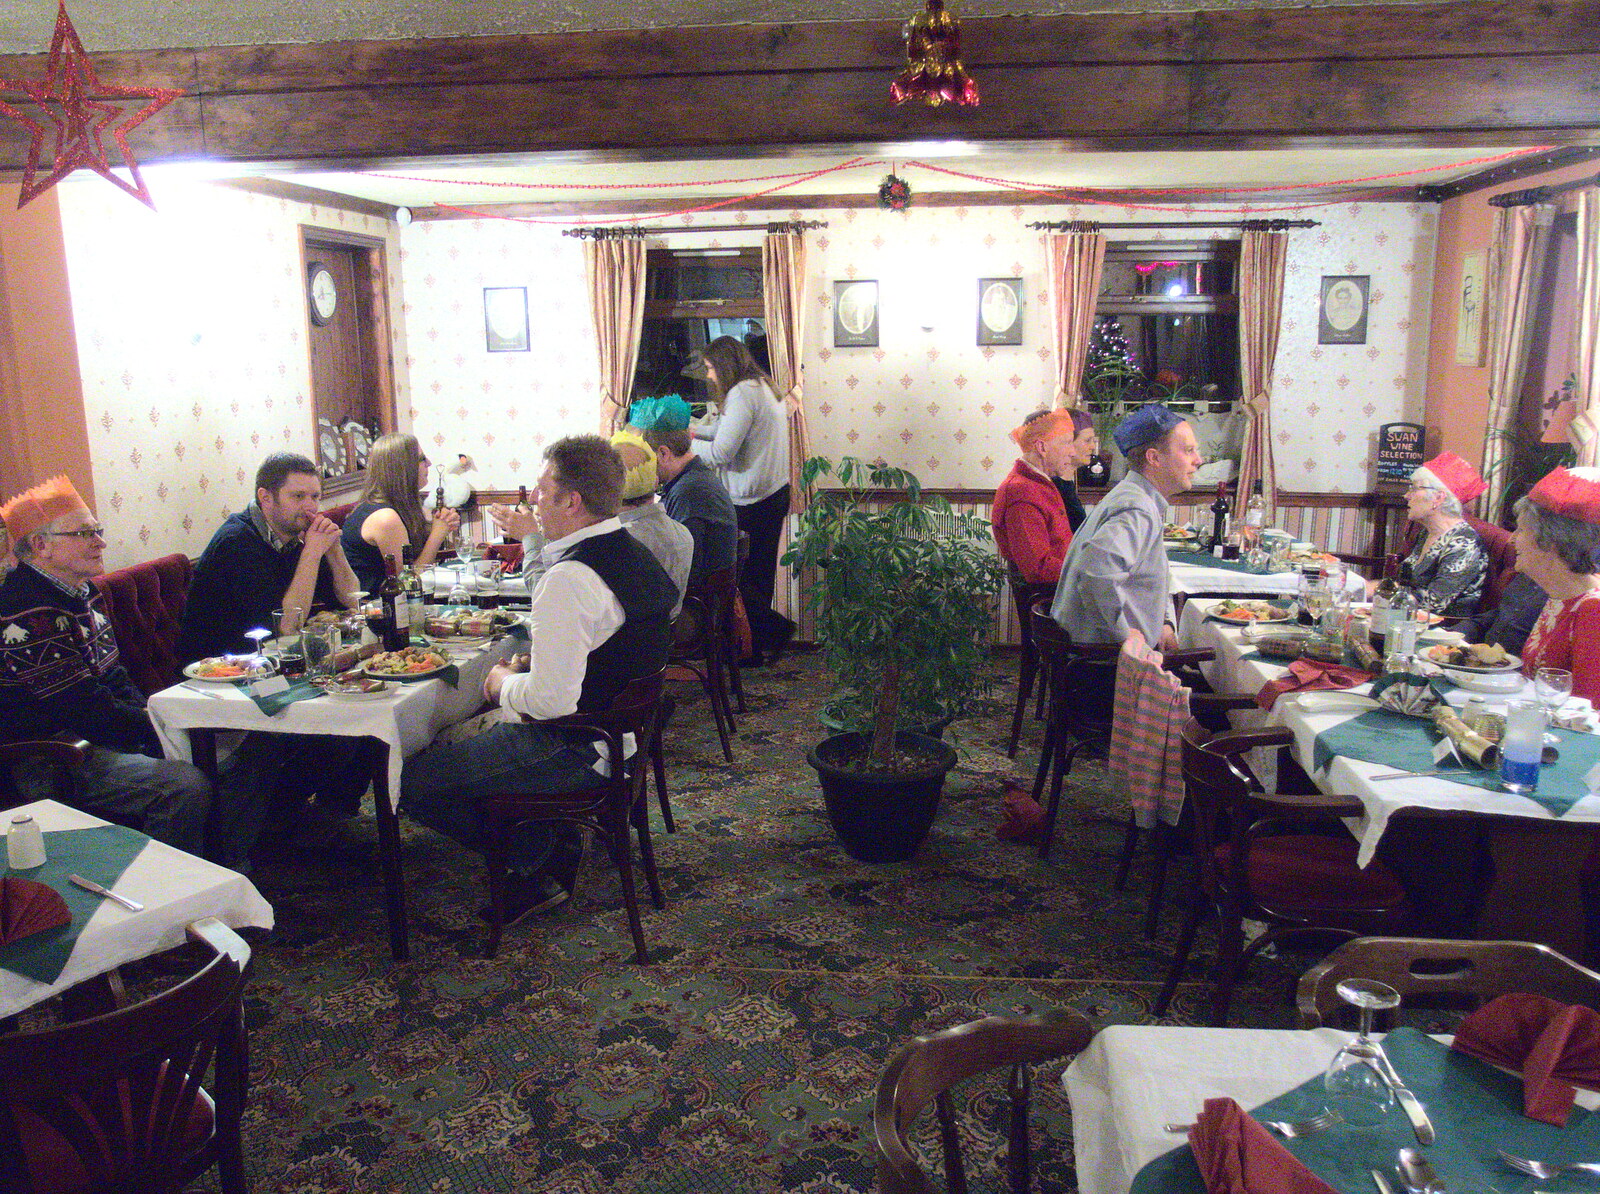 The BSCC Christmas Dinner at The Swan Inn, Brome, Suffolk - 3rd December 2016: The bike club at dinner